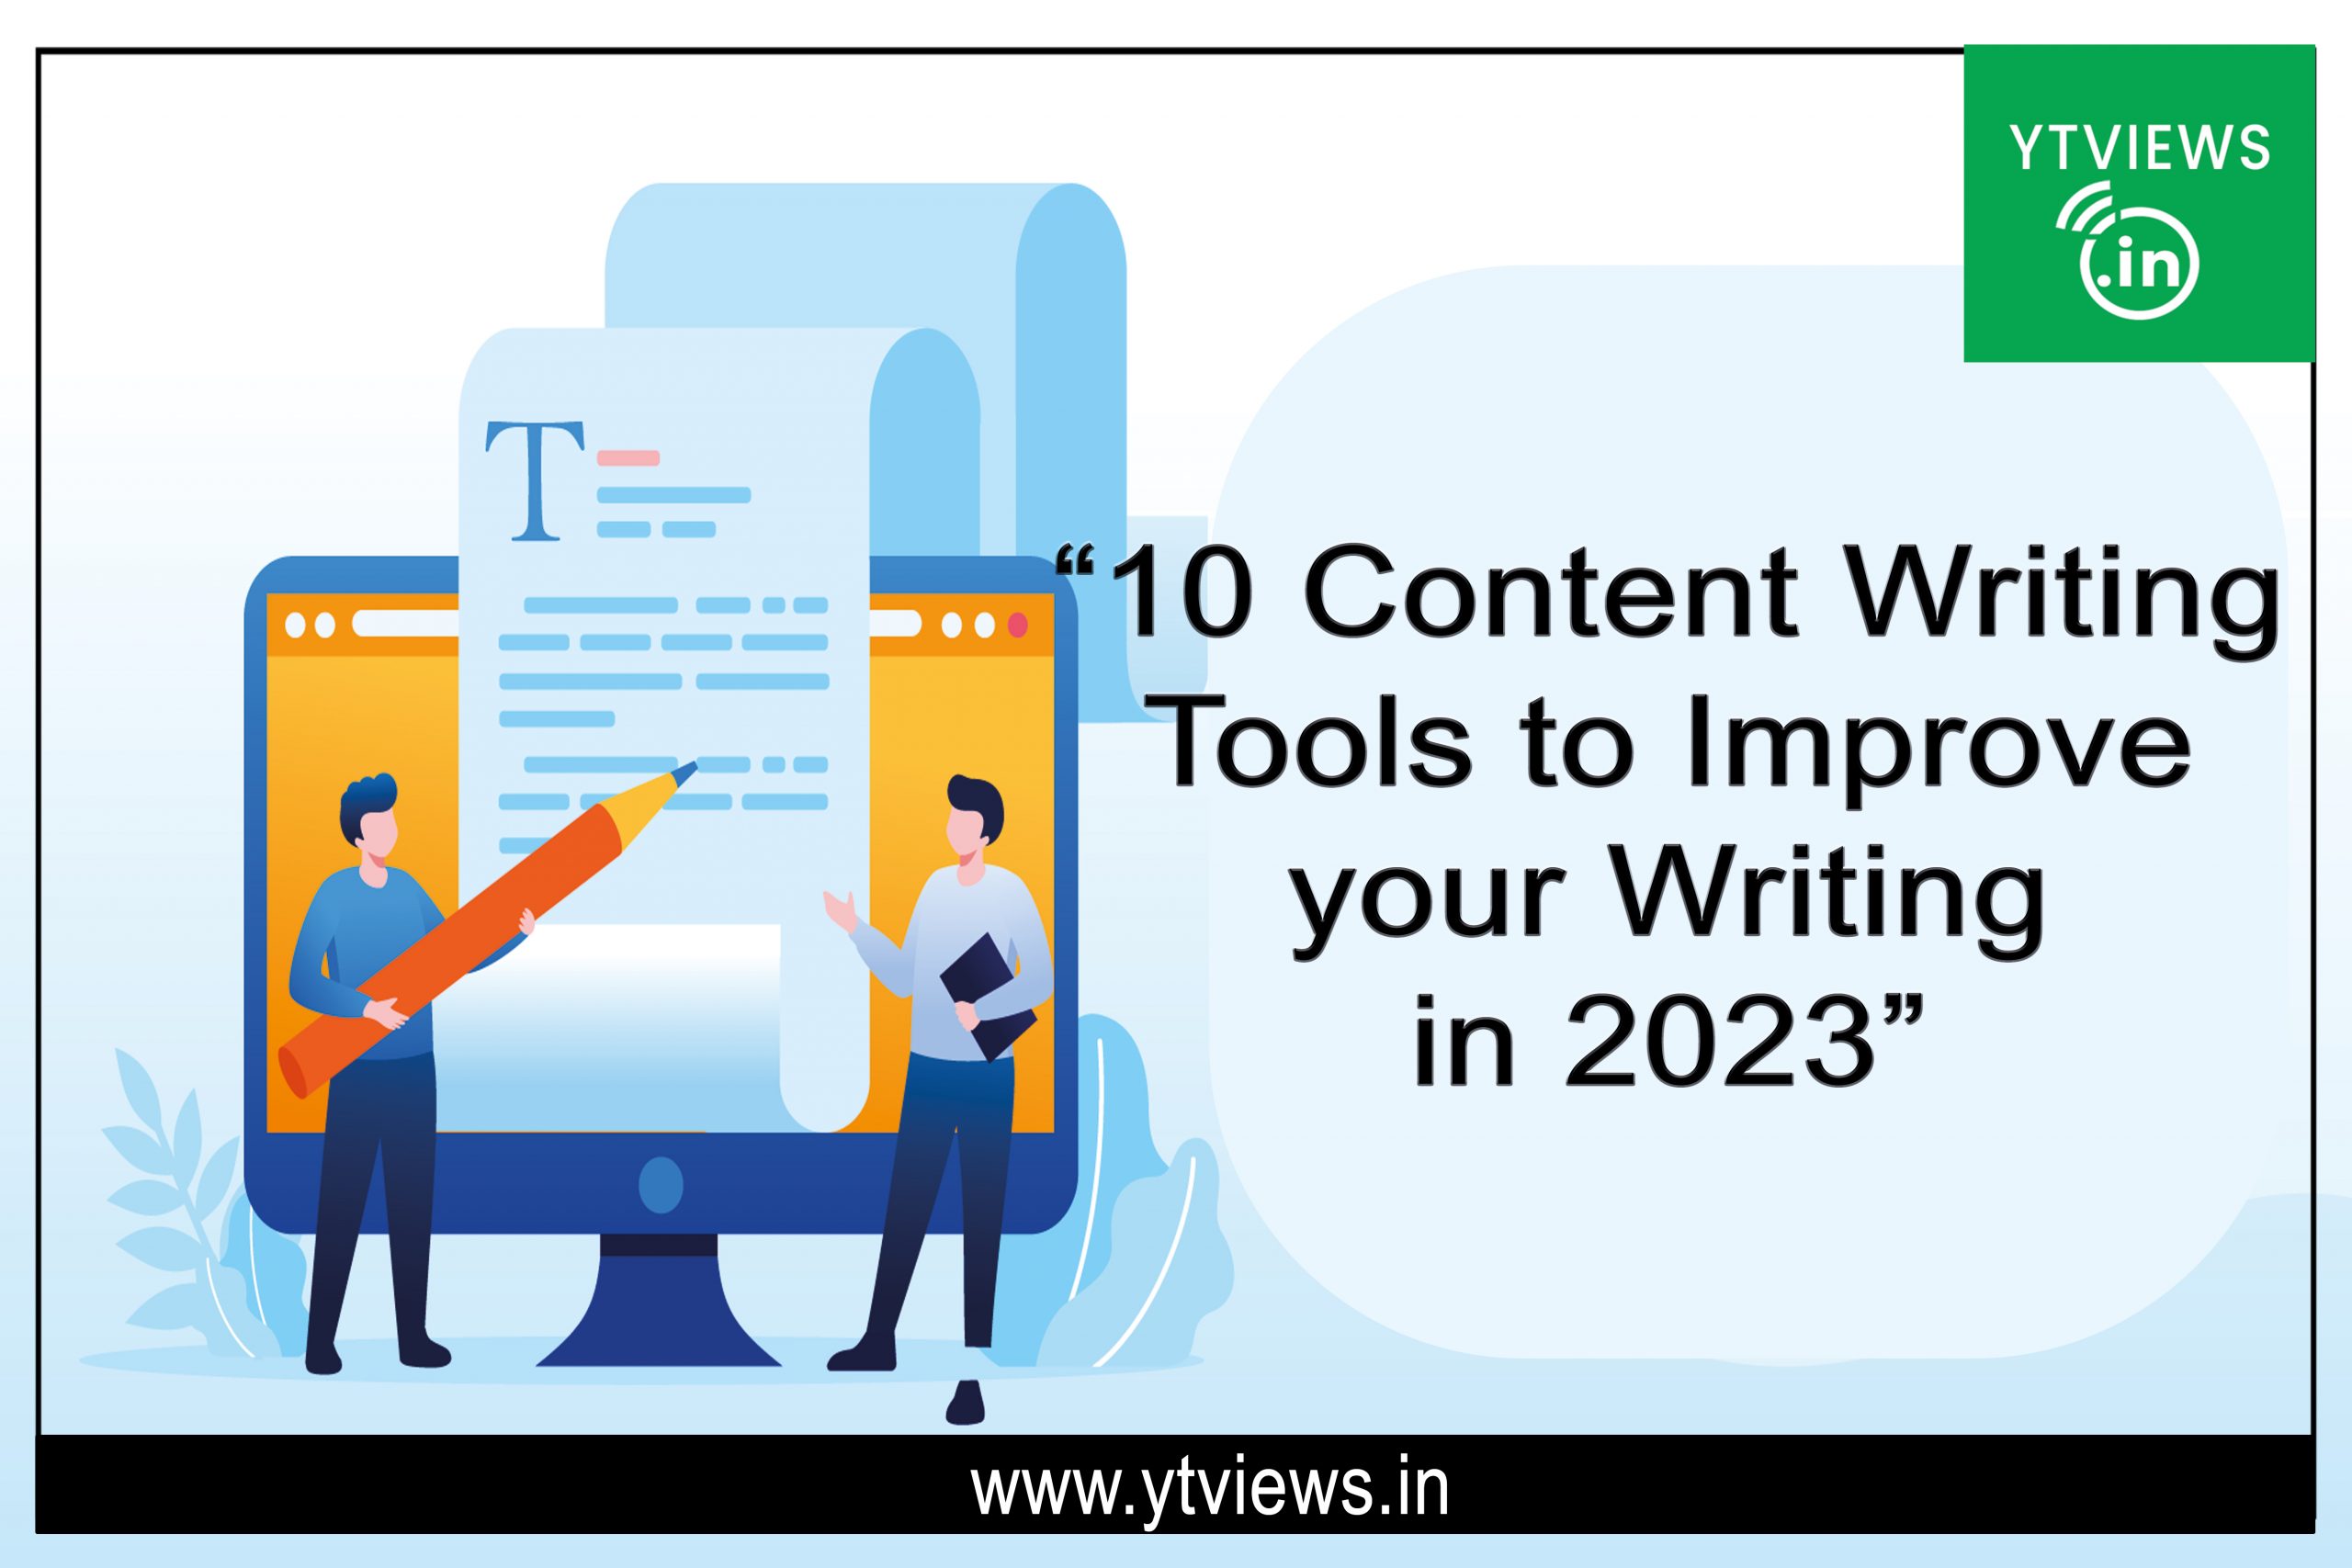 10 Content Writing Tools to Improve your Writing in 2023